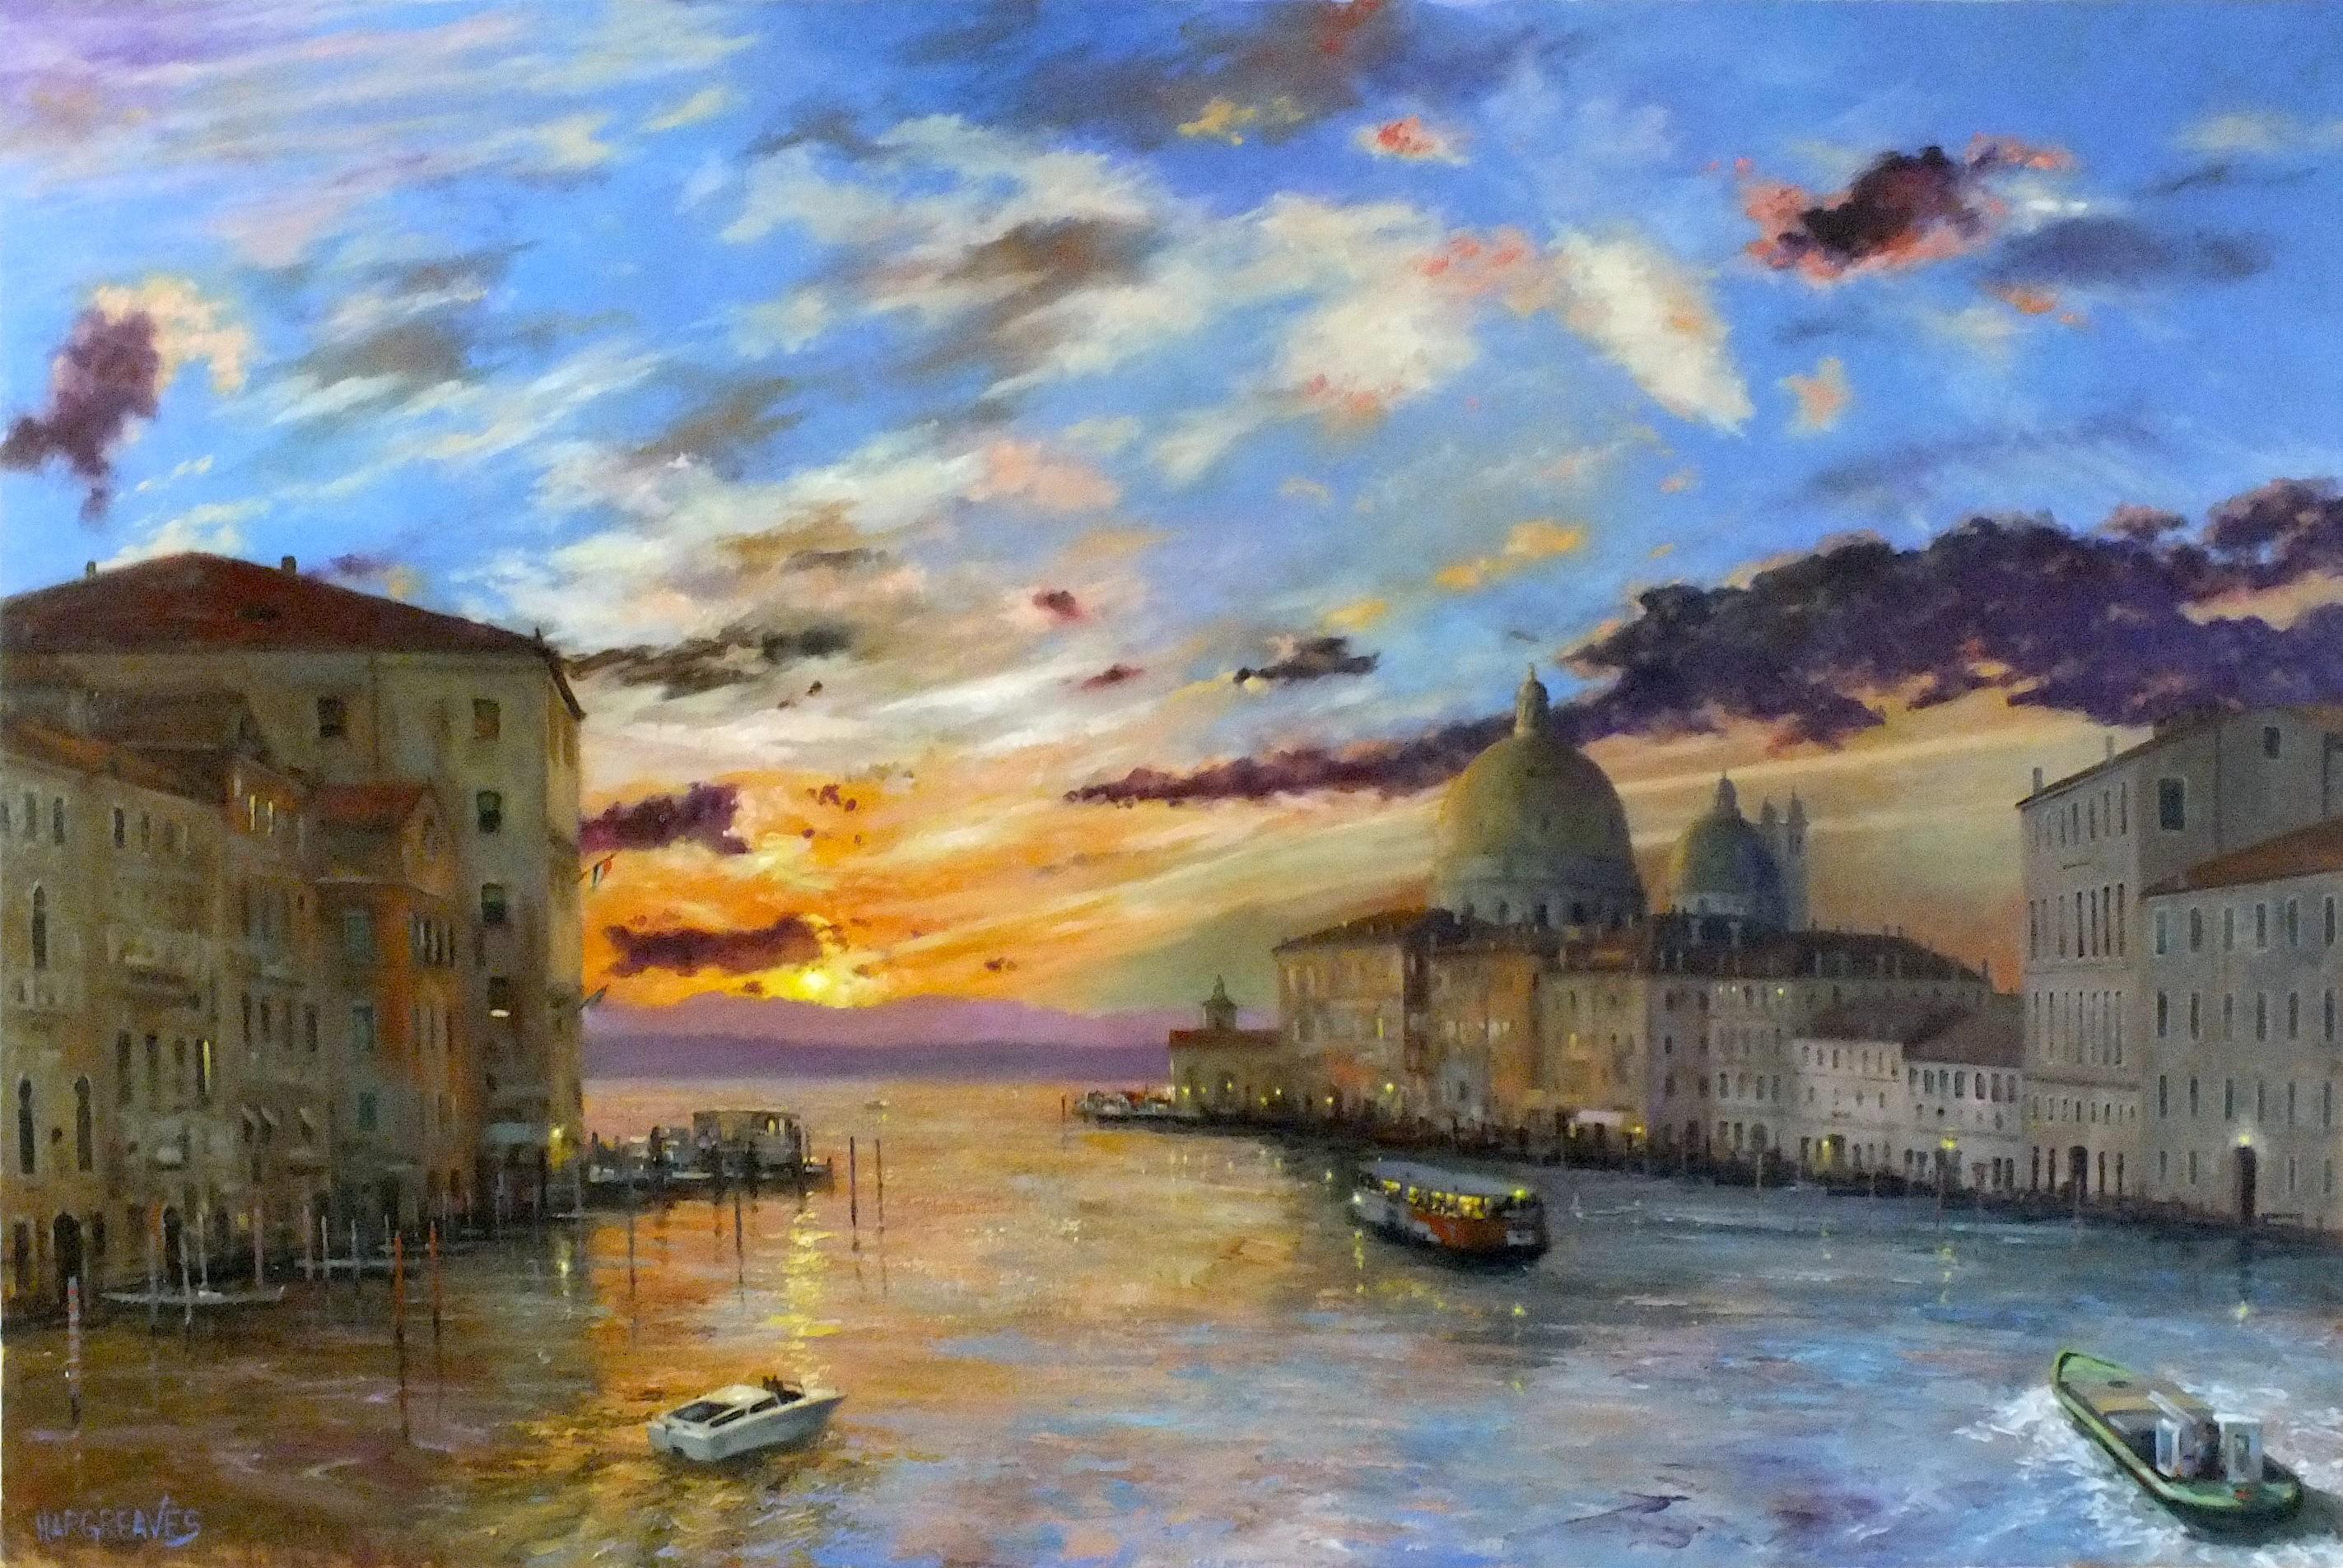 Venice-Risers III -original impressionism seascape oil painting-contemporary Art - Painting by Ian Hargreaves